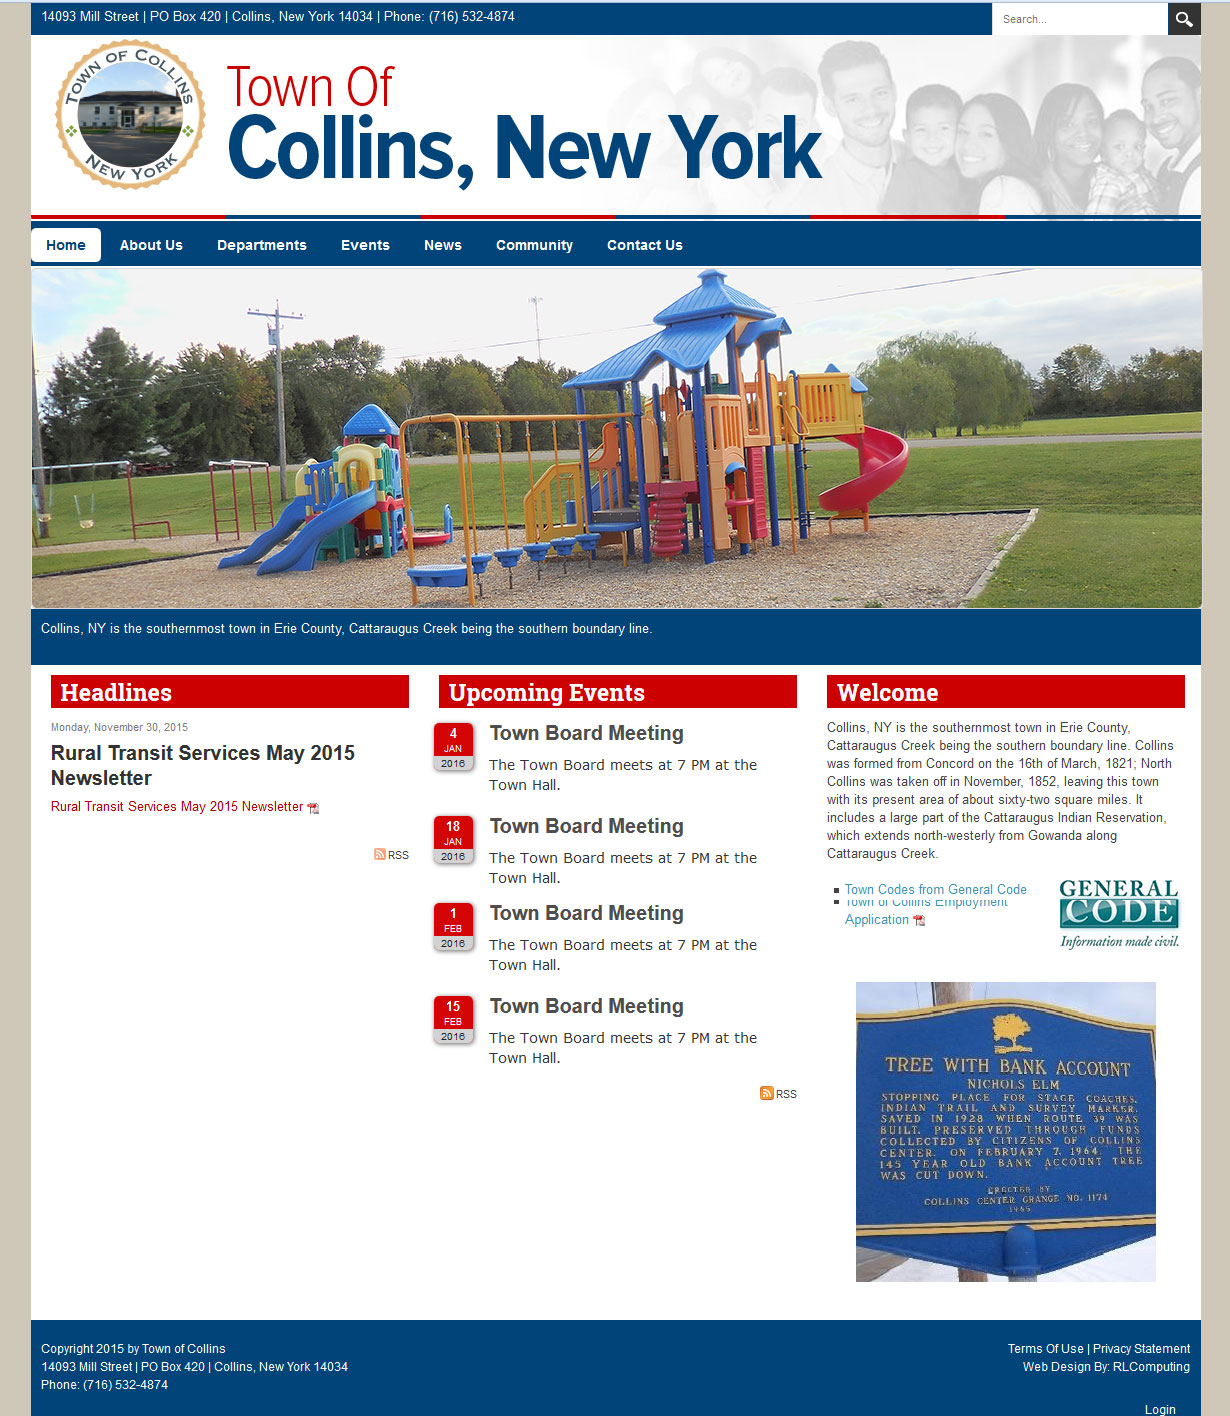 Town of Collins